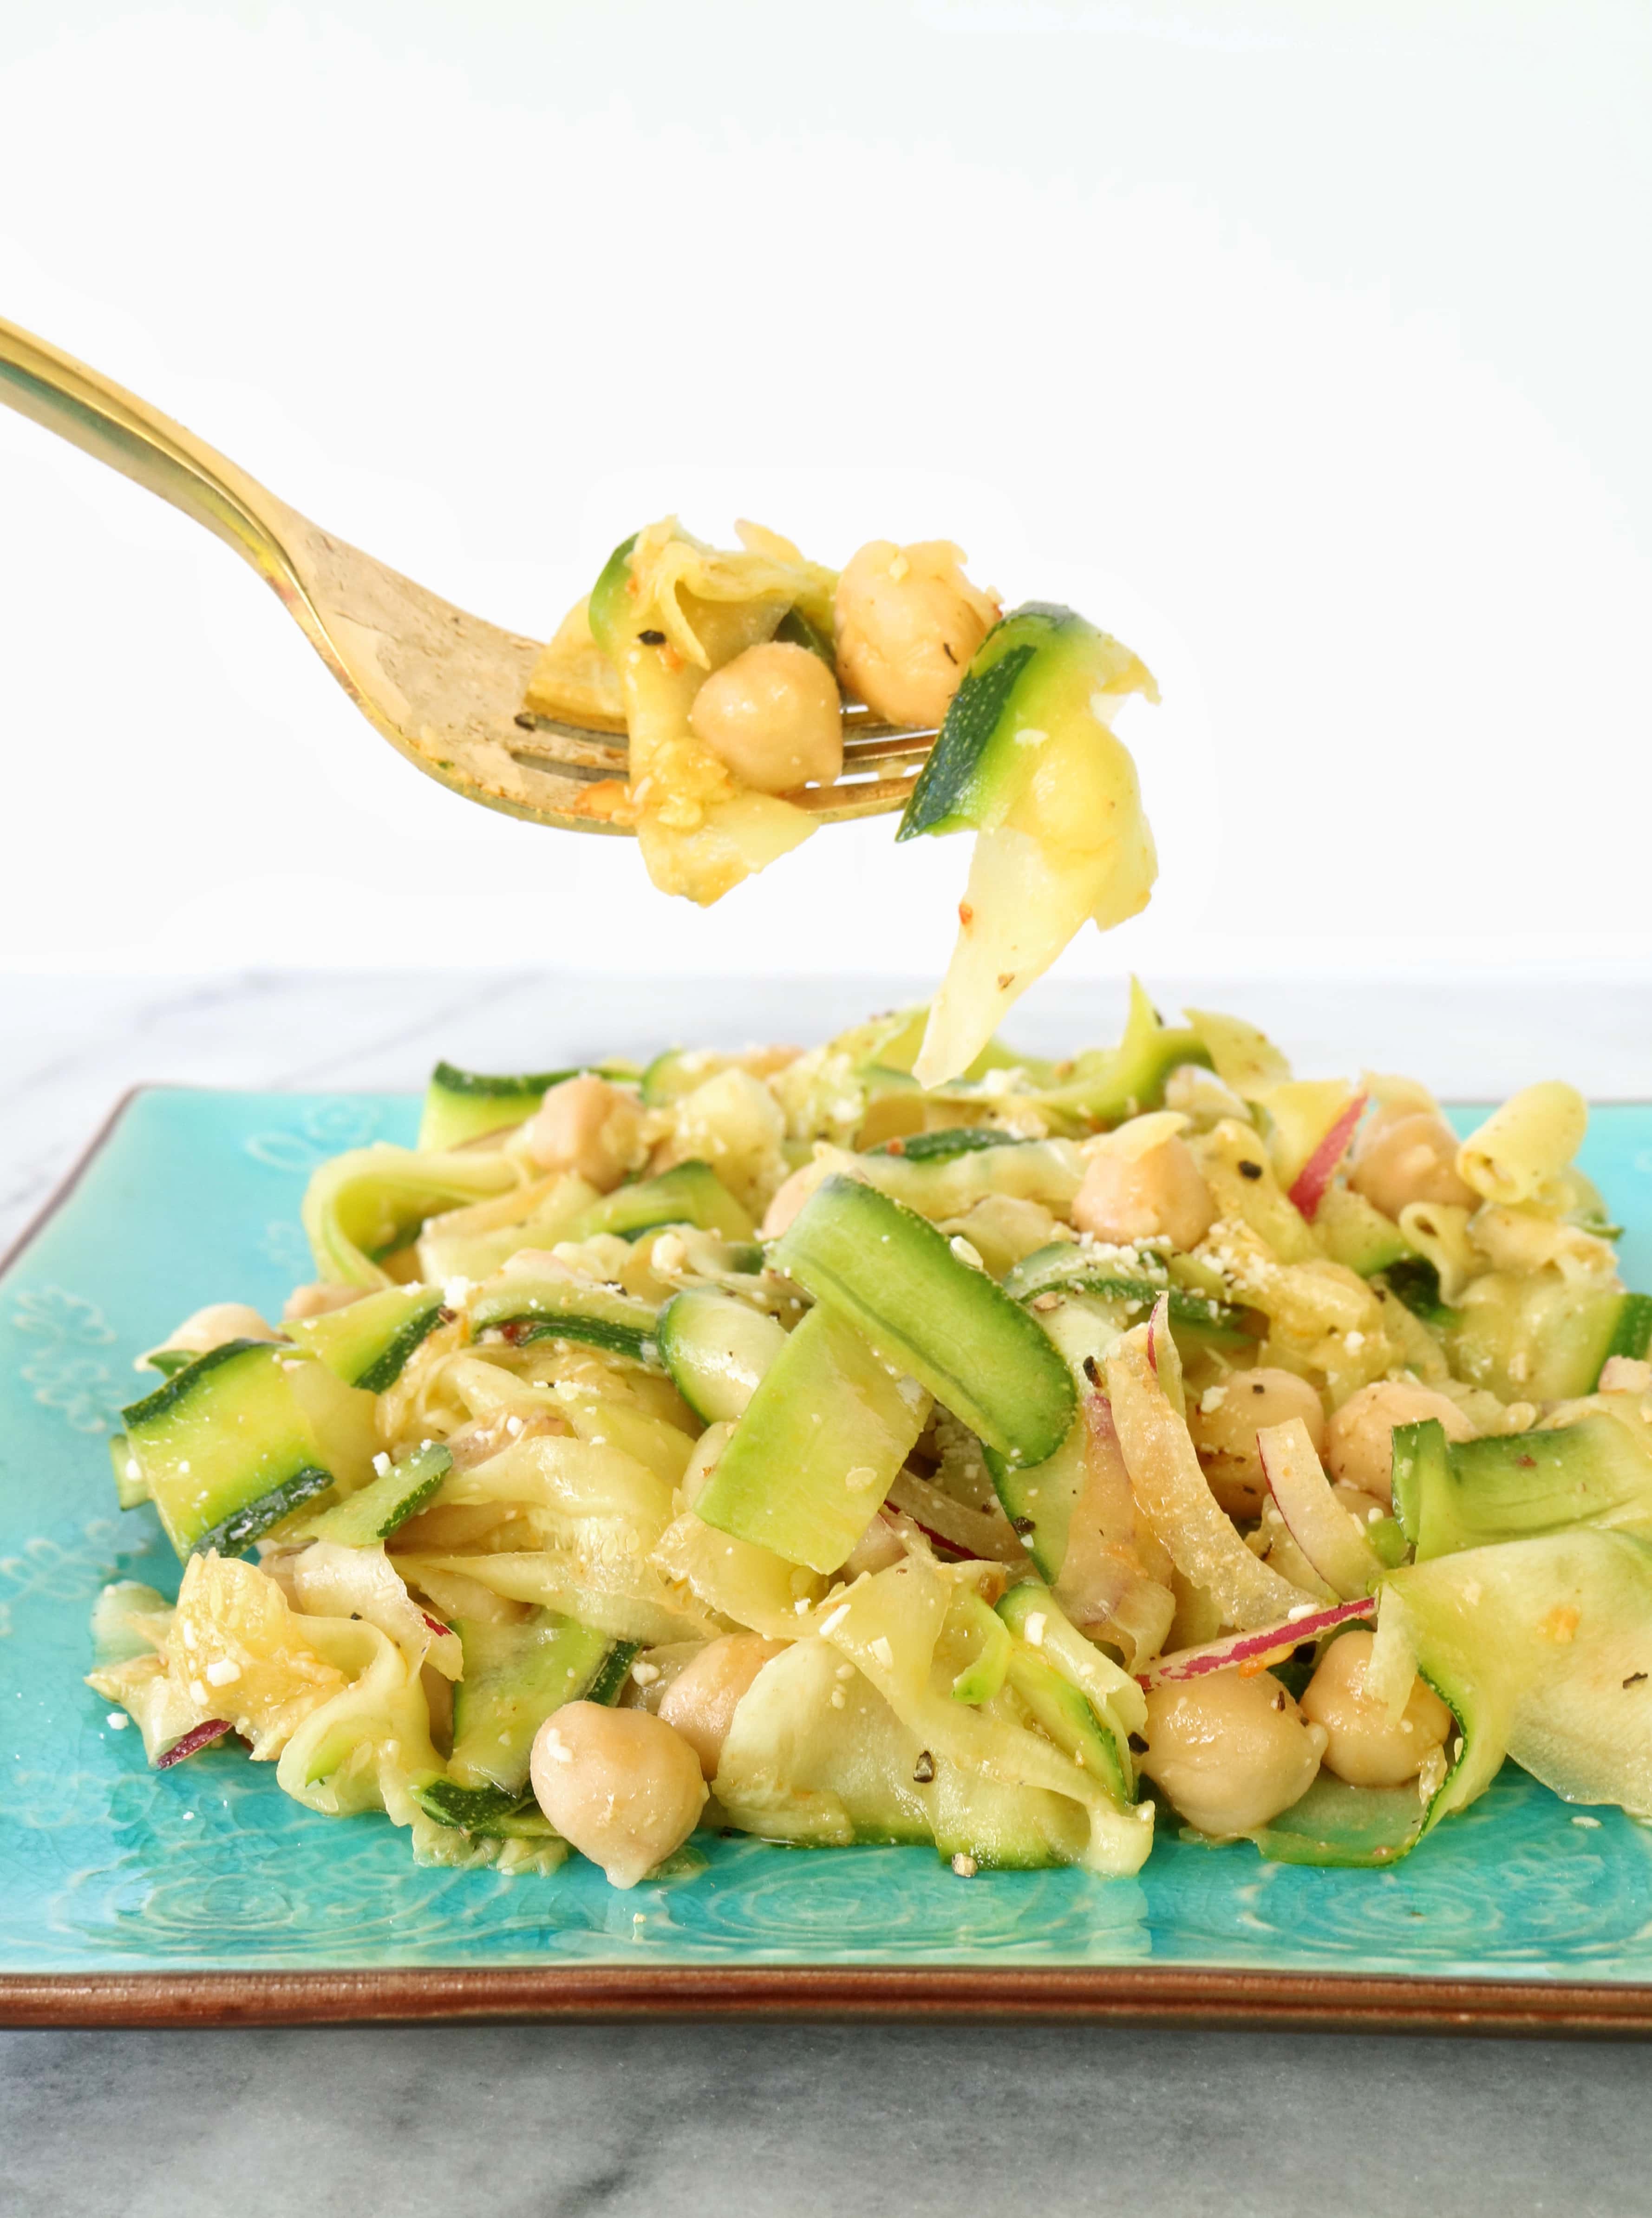 Zucchini Ribbons with Chickpeas & Chili Oil